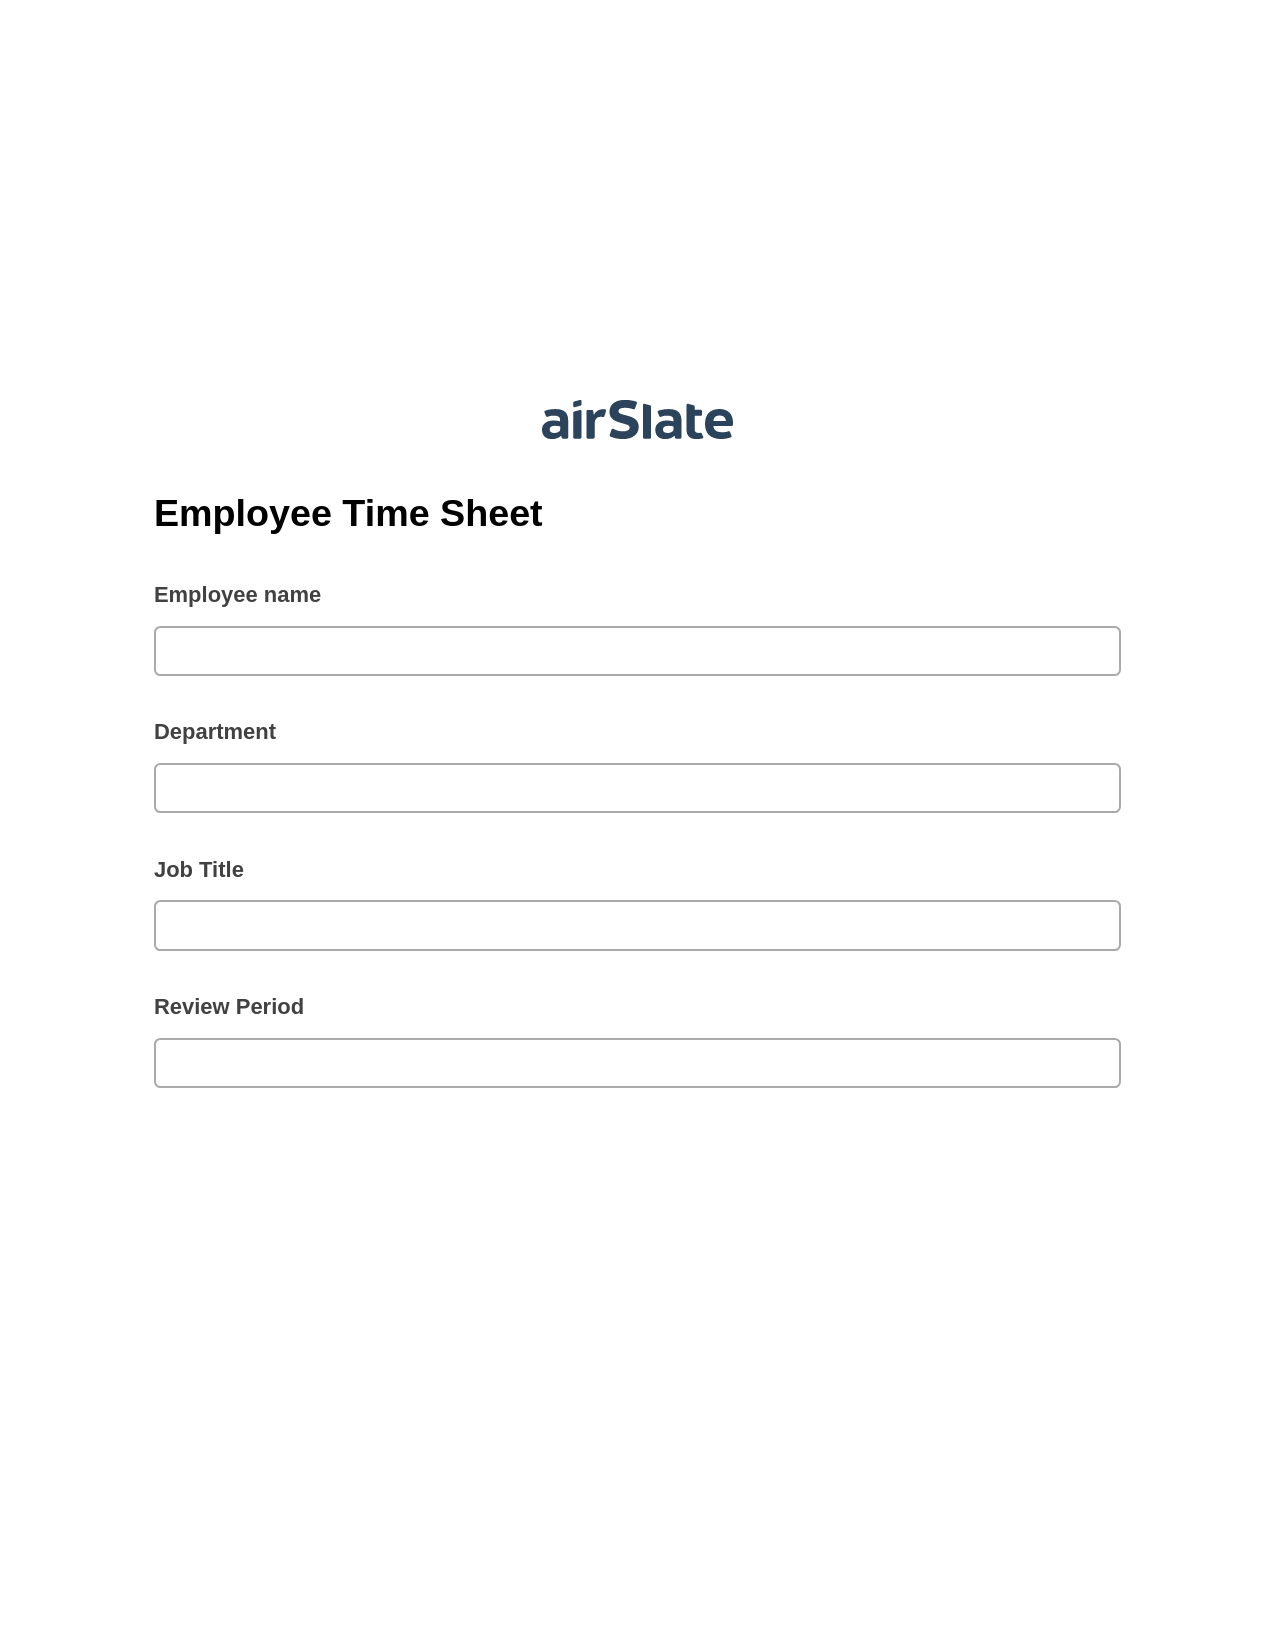 Multirole Employee Time Sheet Pre-fill from Excel Spreadsheet Bot, Create Salesforce Records Bot, Post-finish Document Bot